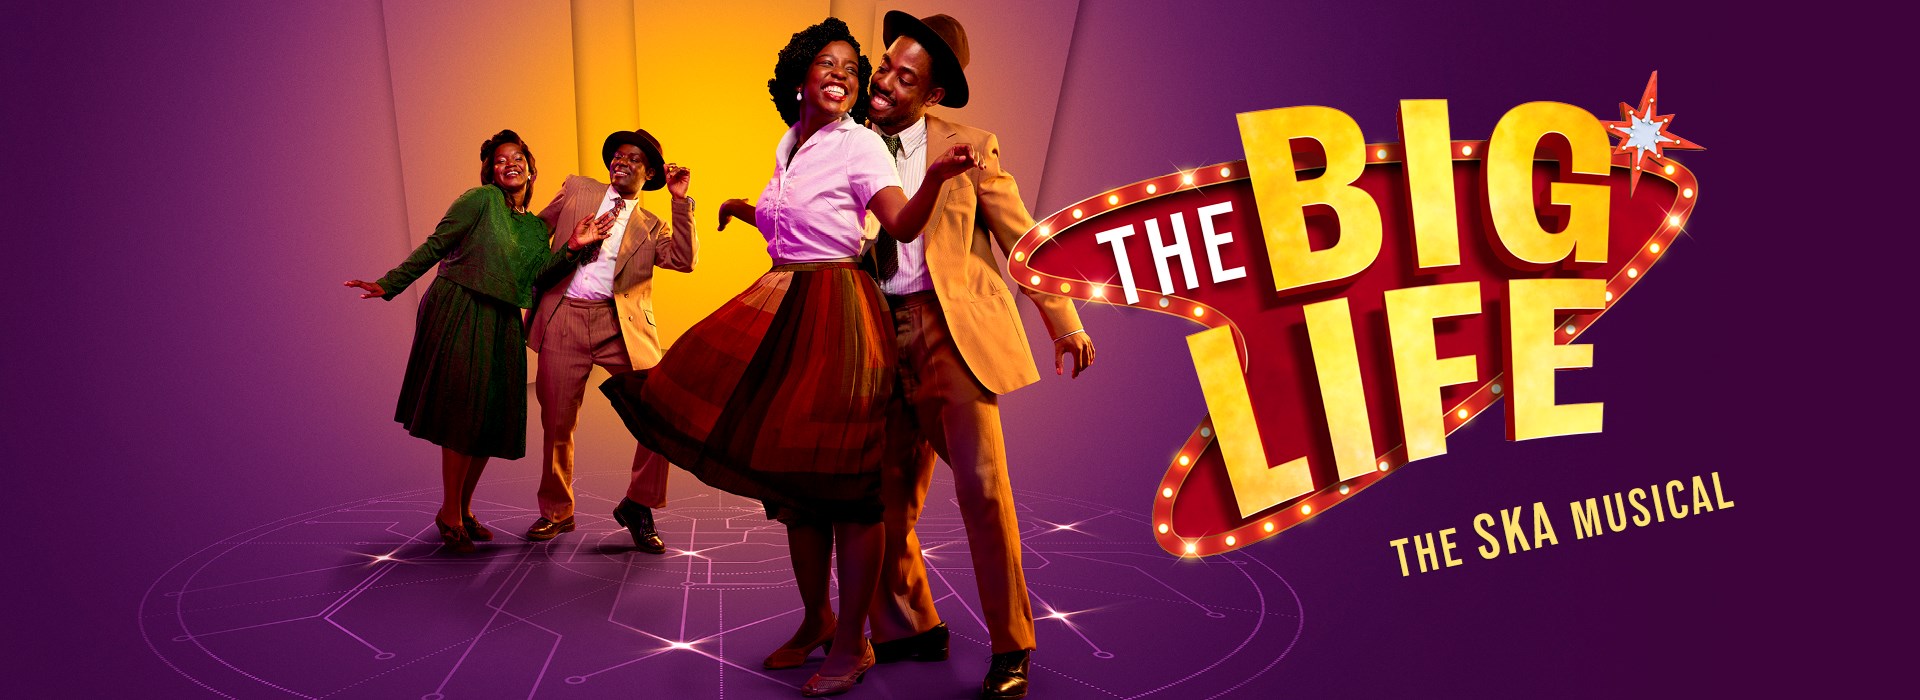 The Big Life (musical), Theatre Royal Stratford East, London